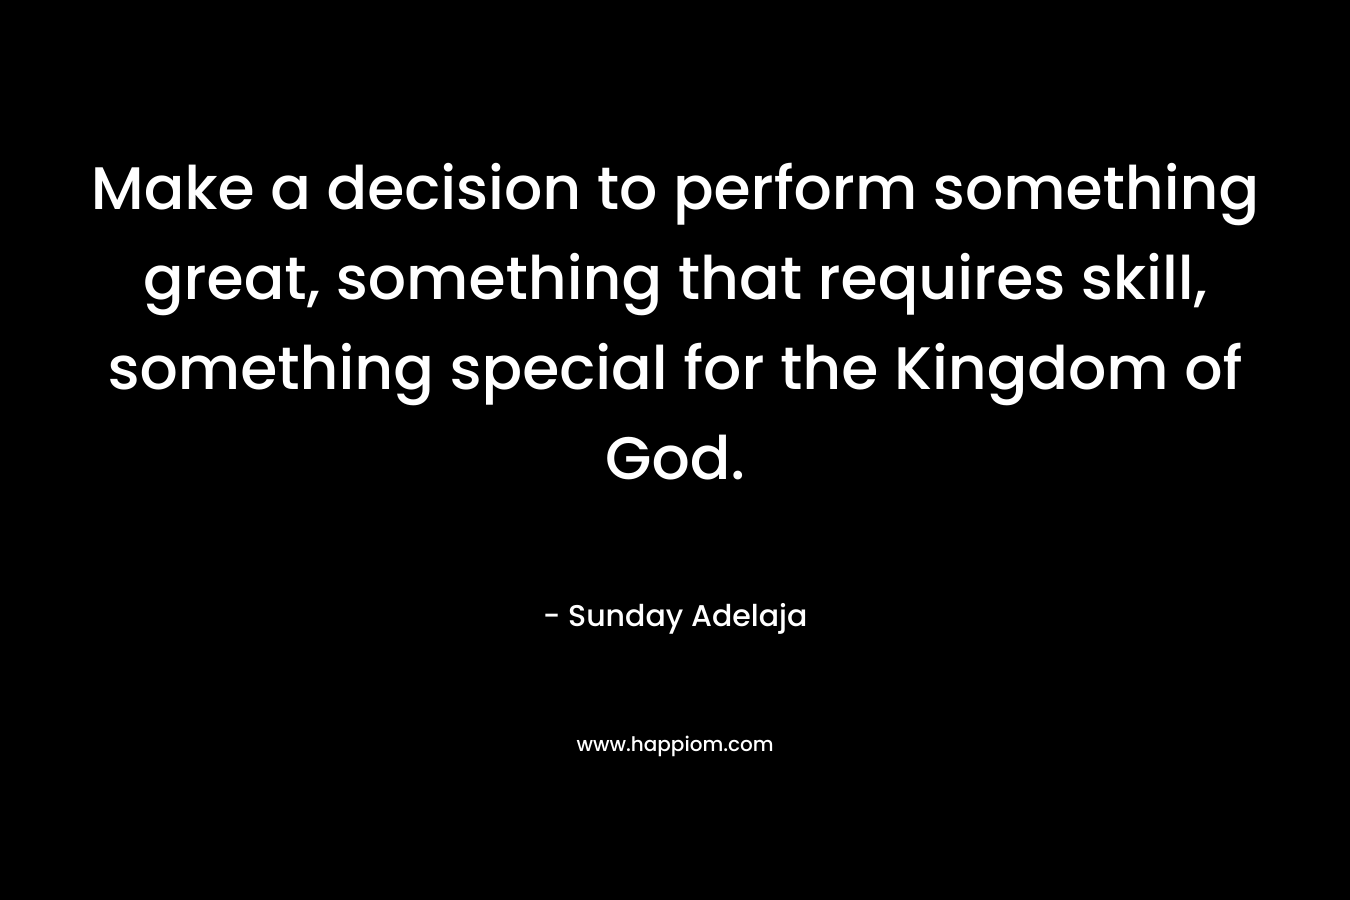 Make a decision to perform something great, something that requires skill, something special for the Kingdom of God. – Sunday Adelaja